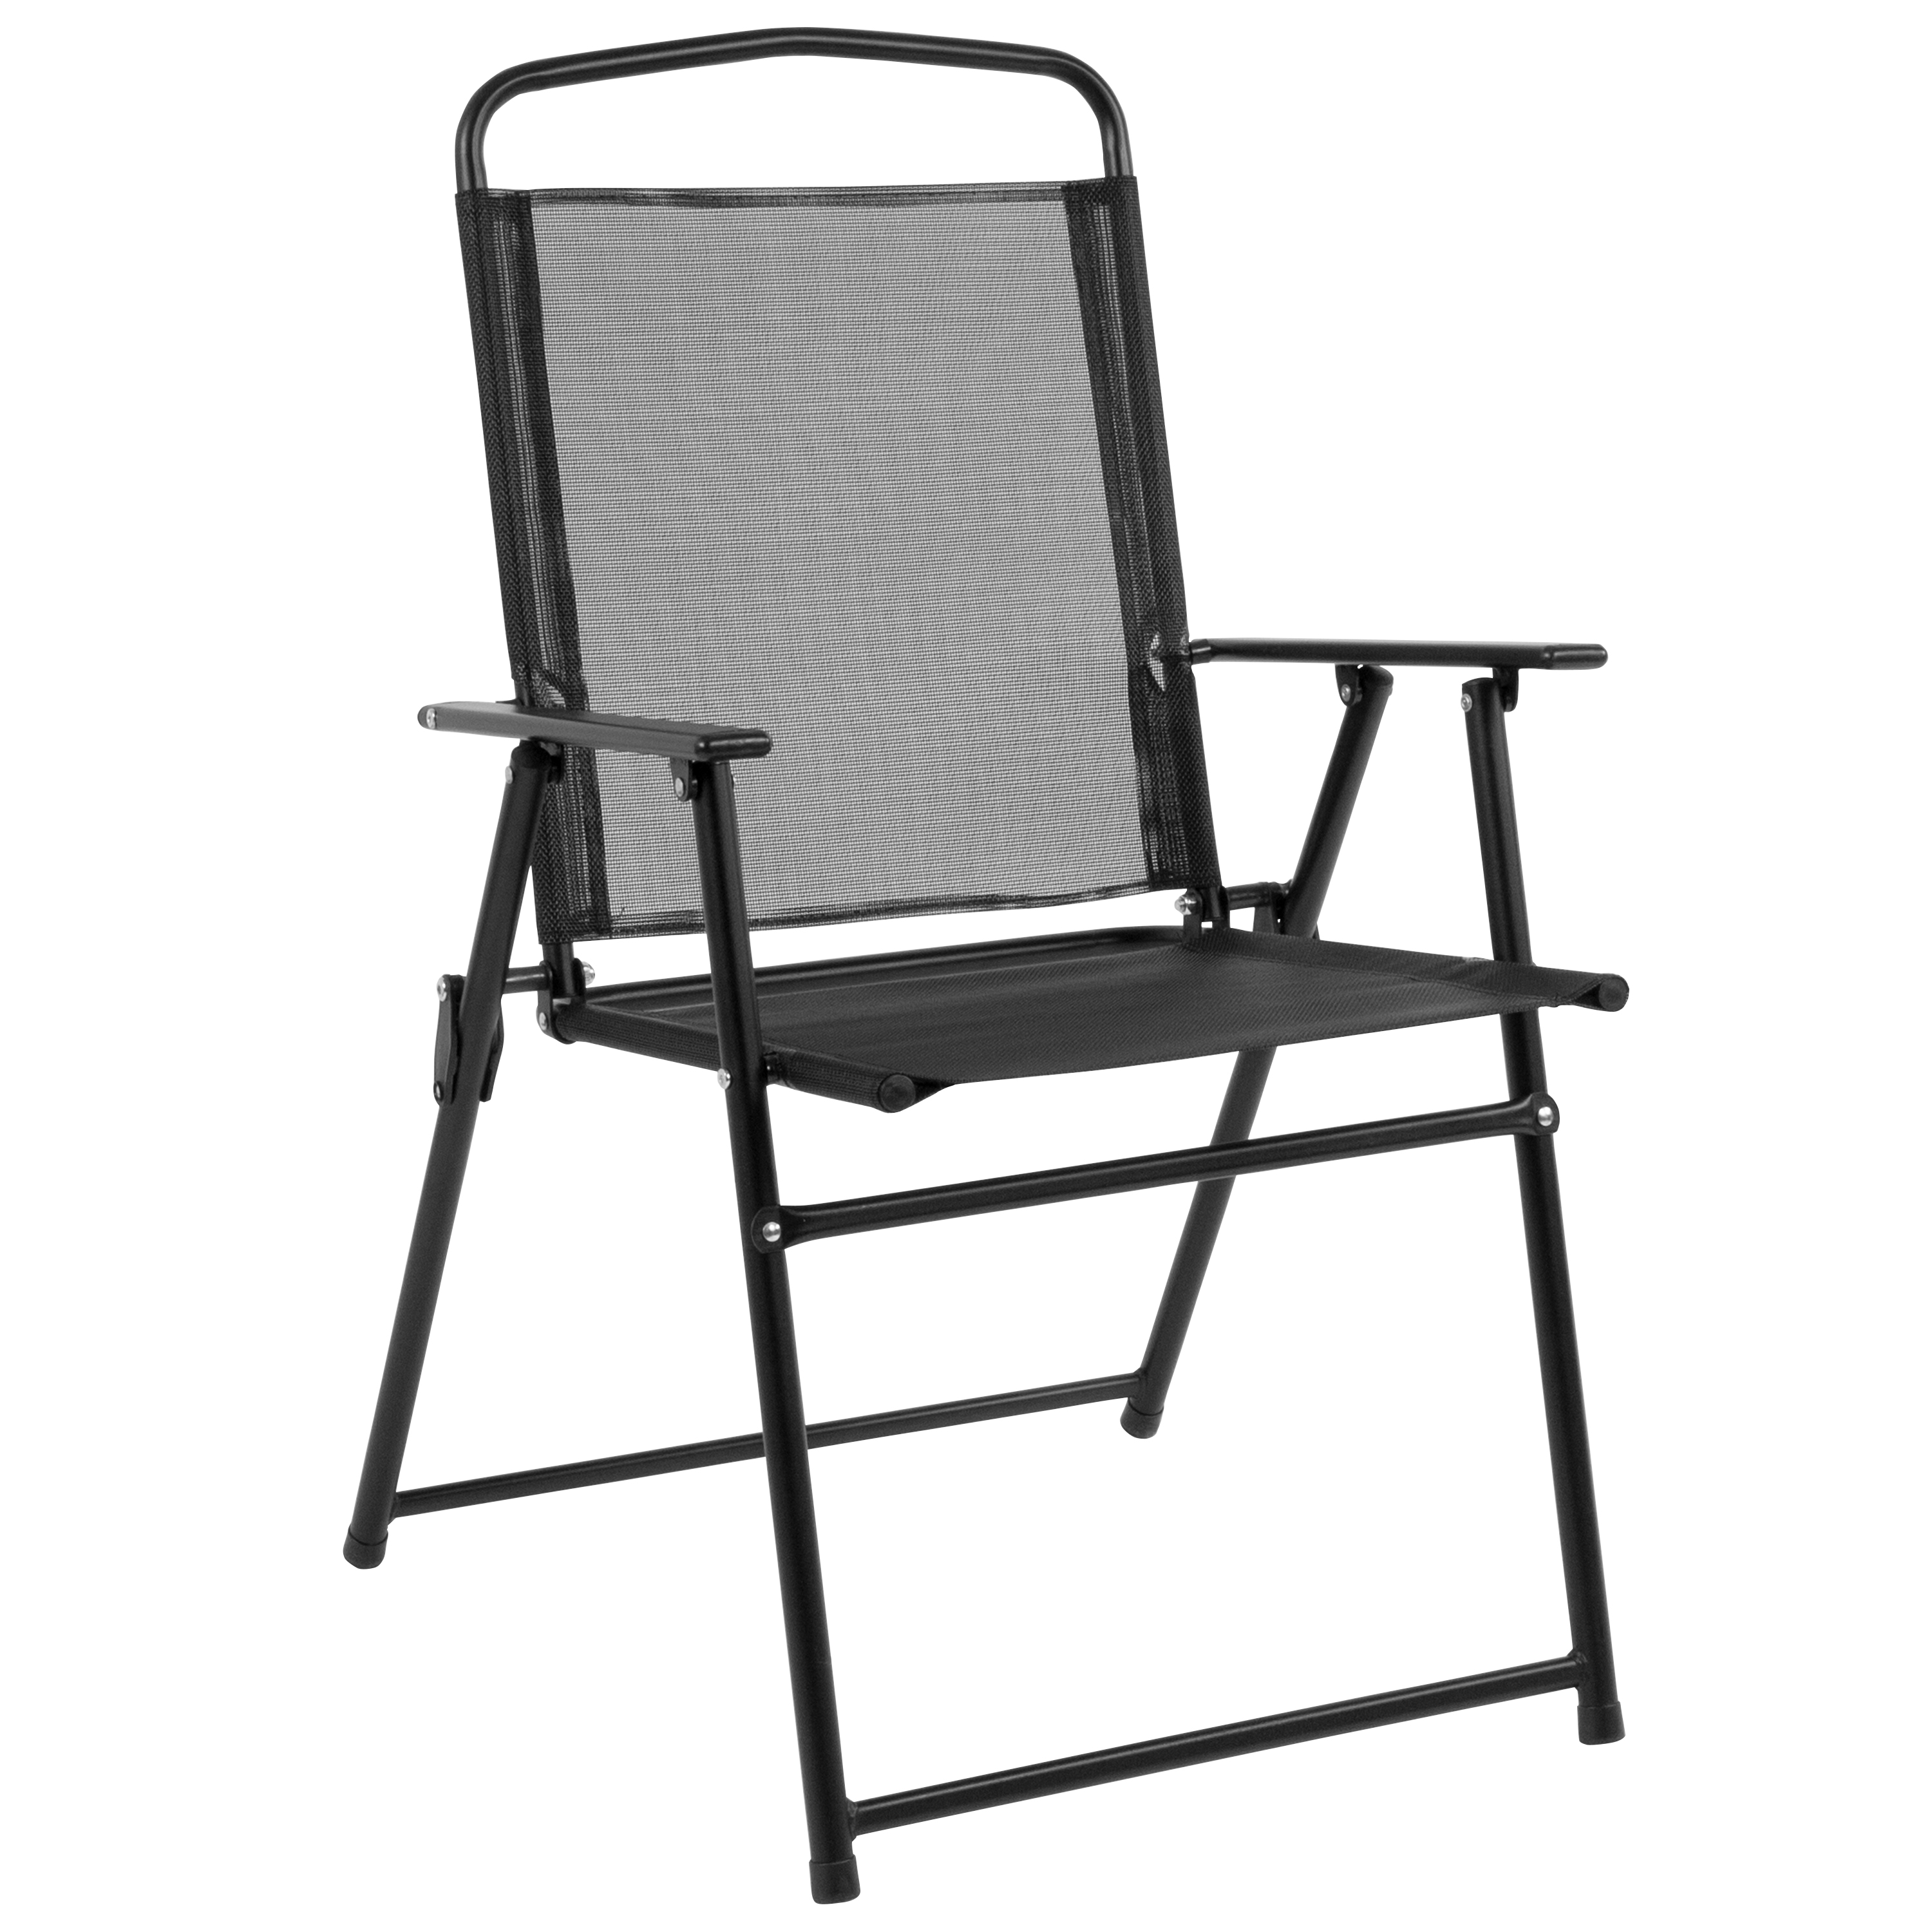 Flash Furniture Nantucket 6-Piece Patio Set with Glass Table, Umbrella, and 4 Folding Chairs, Black - image 3 of 16